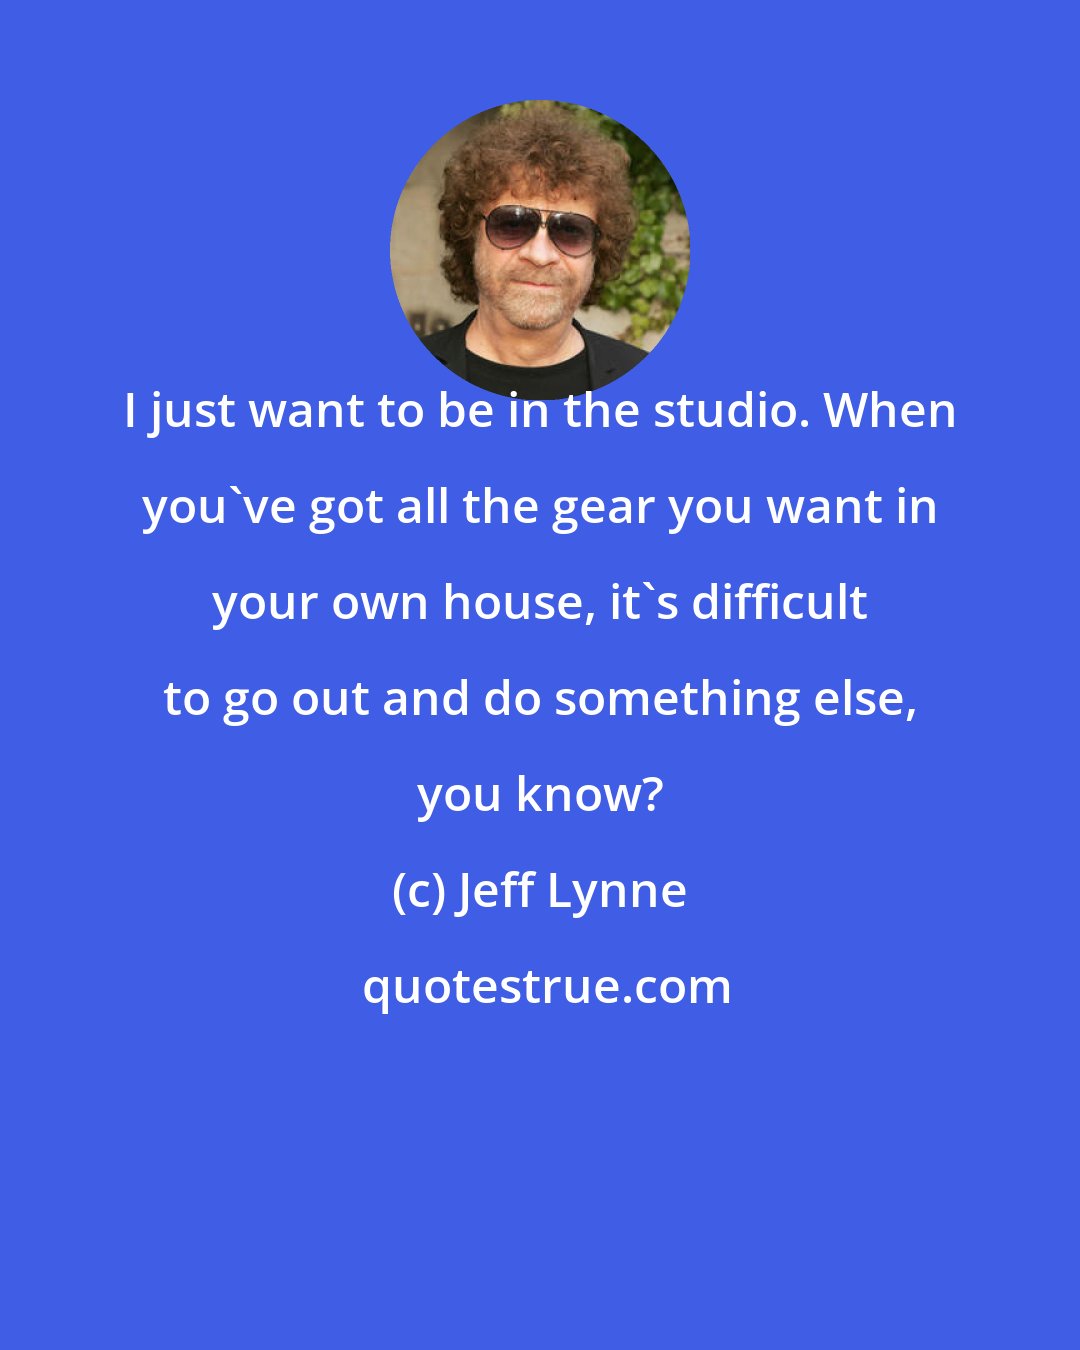 Jeff Lynne: I just want to be in the studio. When you've got all the gear you want in your own house, it's difficult to go out and do something else, you know?